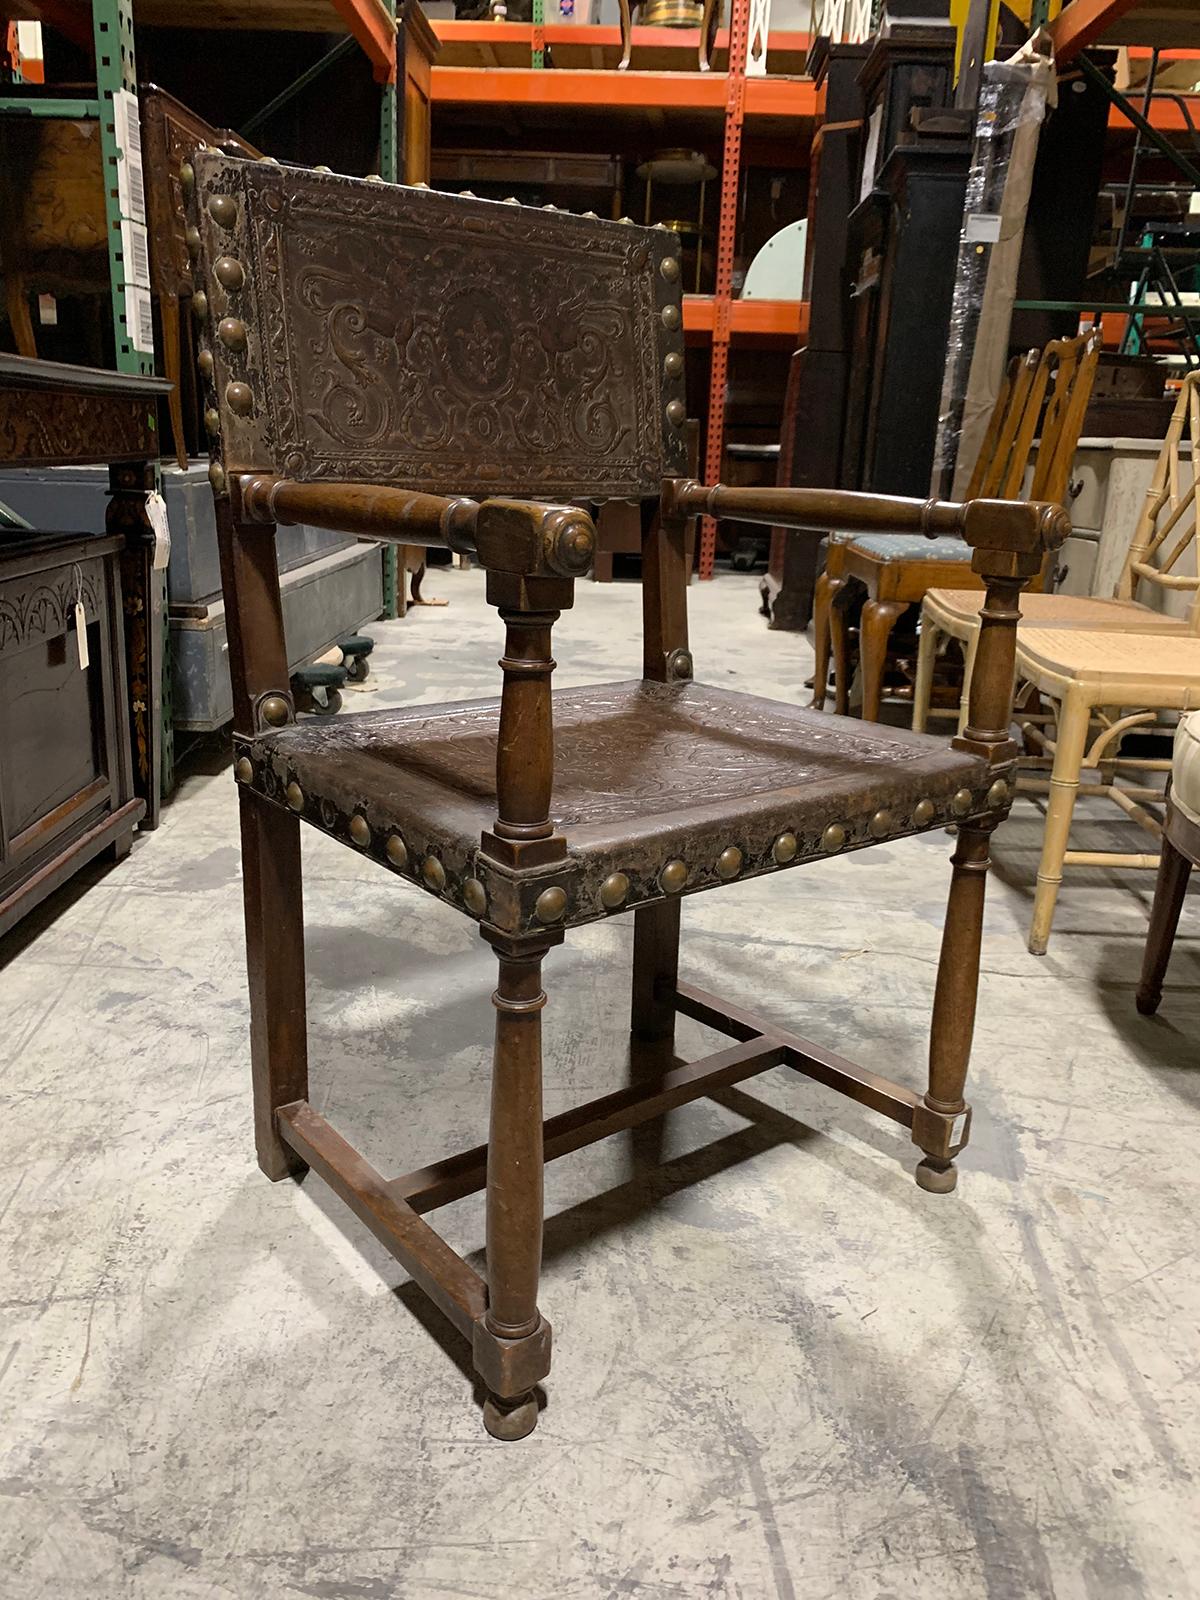 19th-20th Century Italian Armchair with Embossed Leather (Geprägt) im Angebot